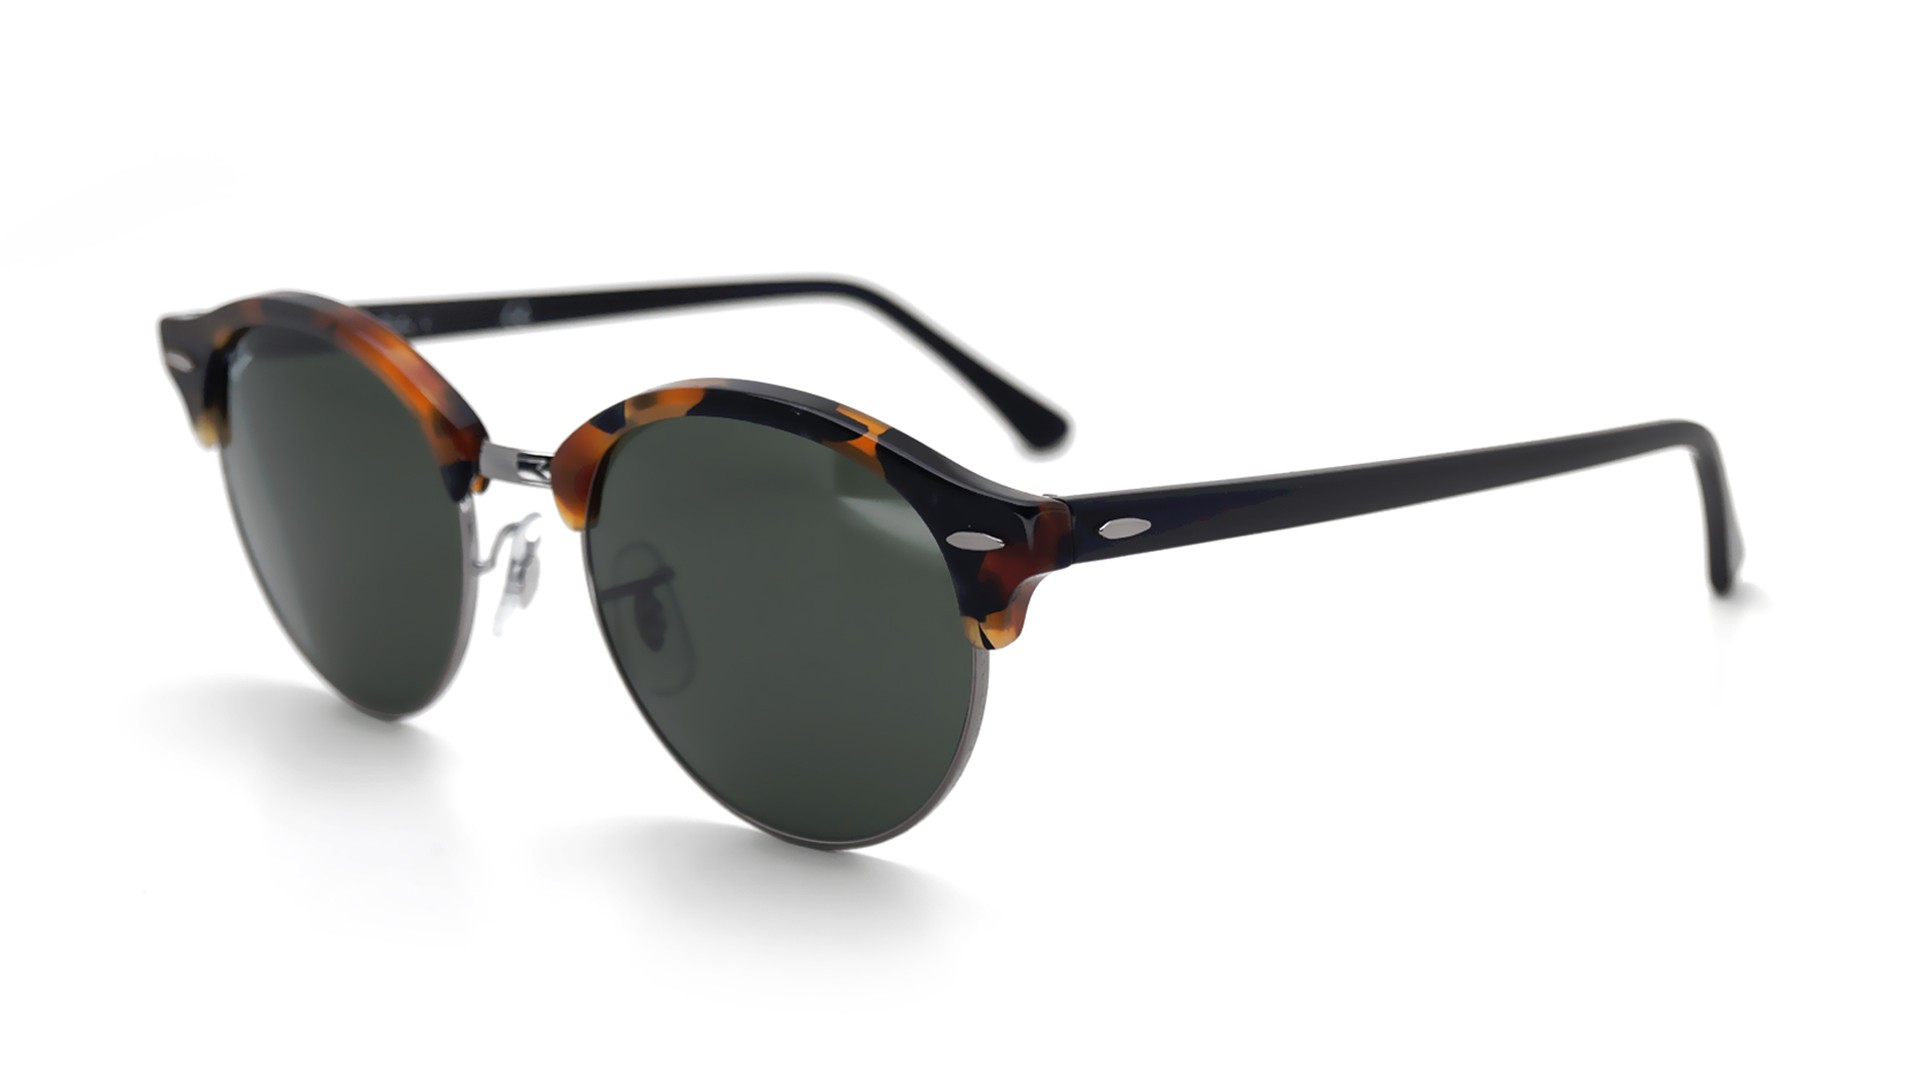 Ray-Ban Clubround Tortoise RB4246 1157 